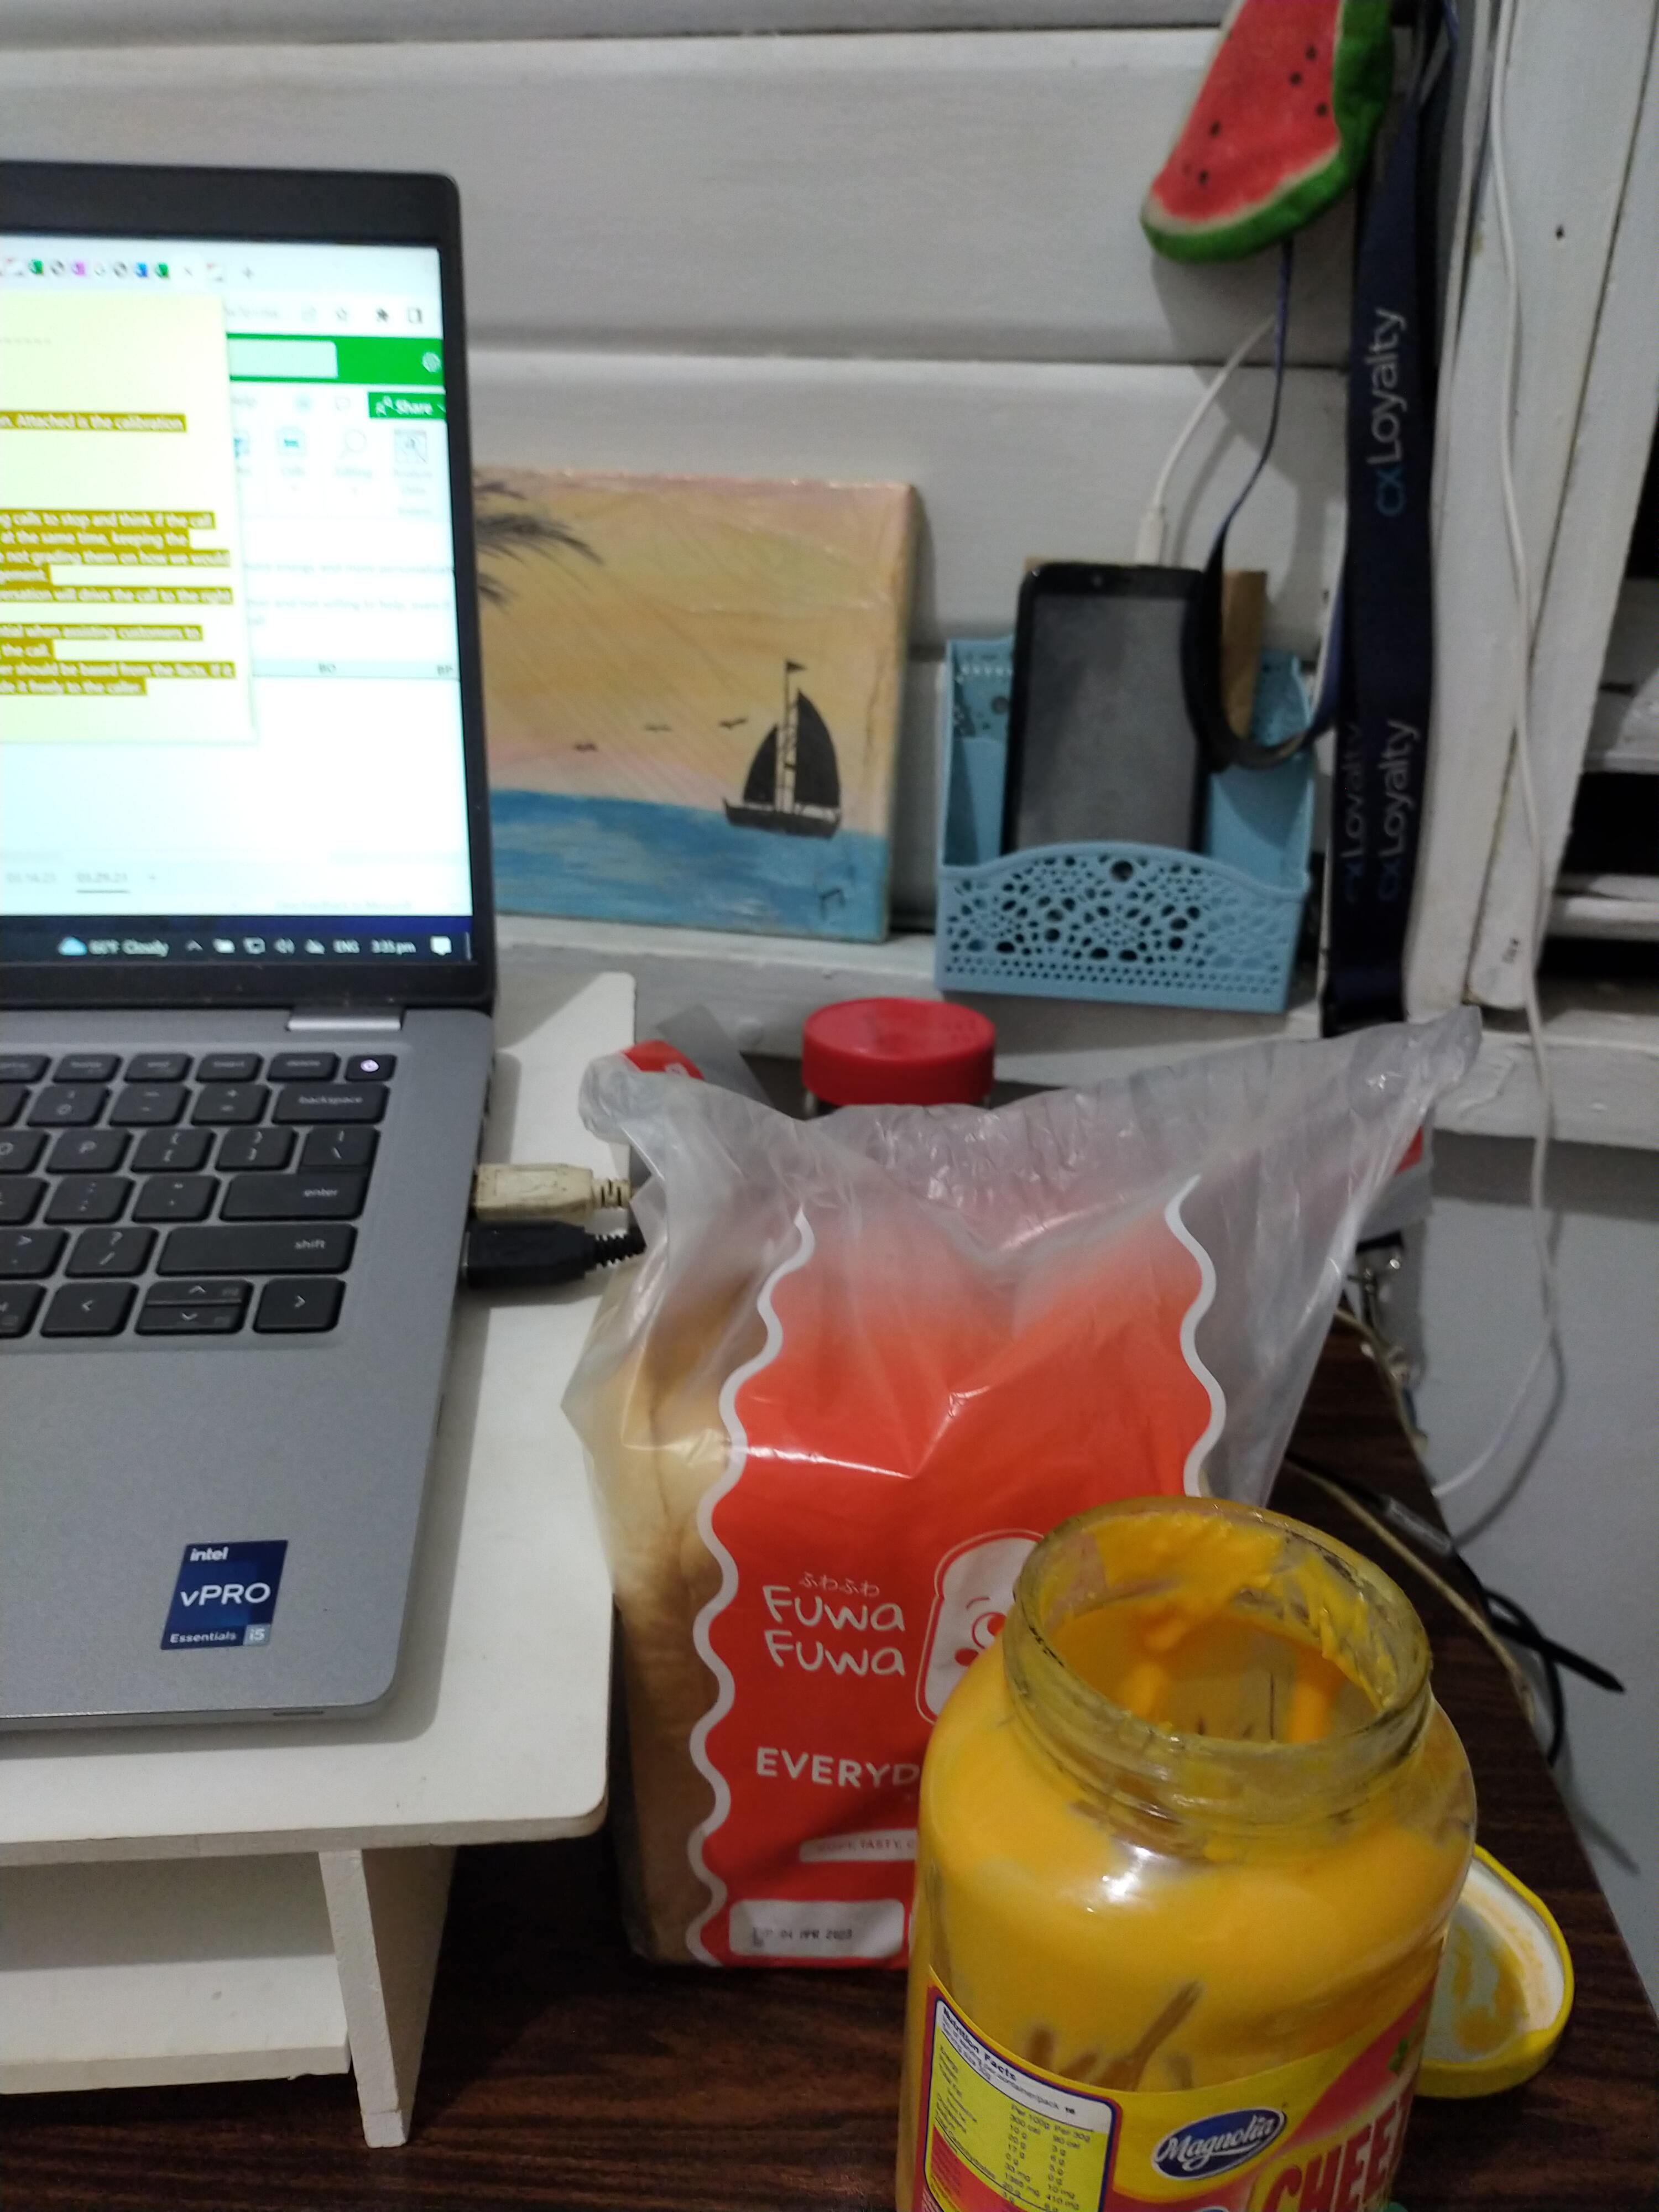 My snacks while working